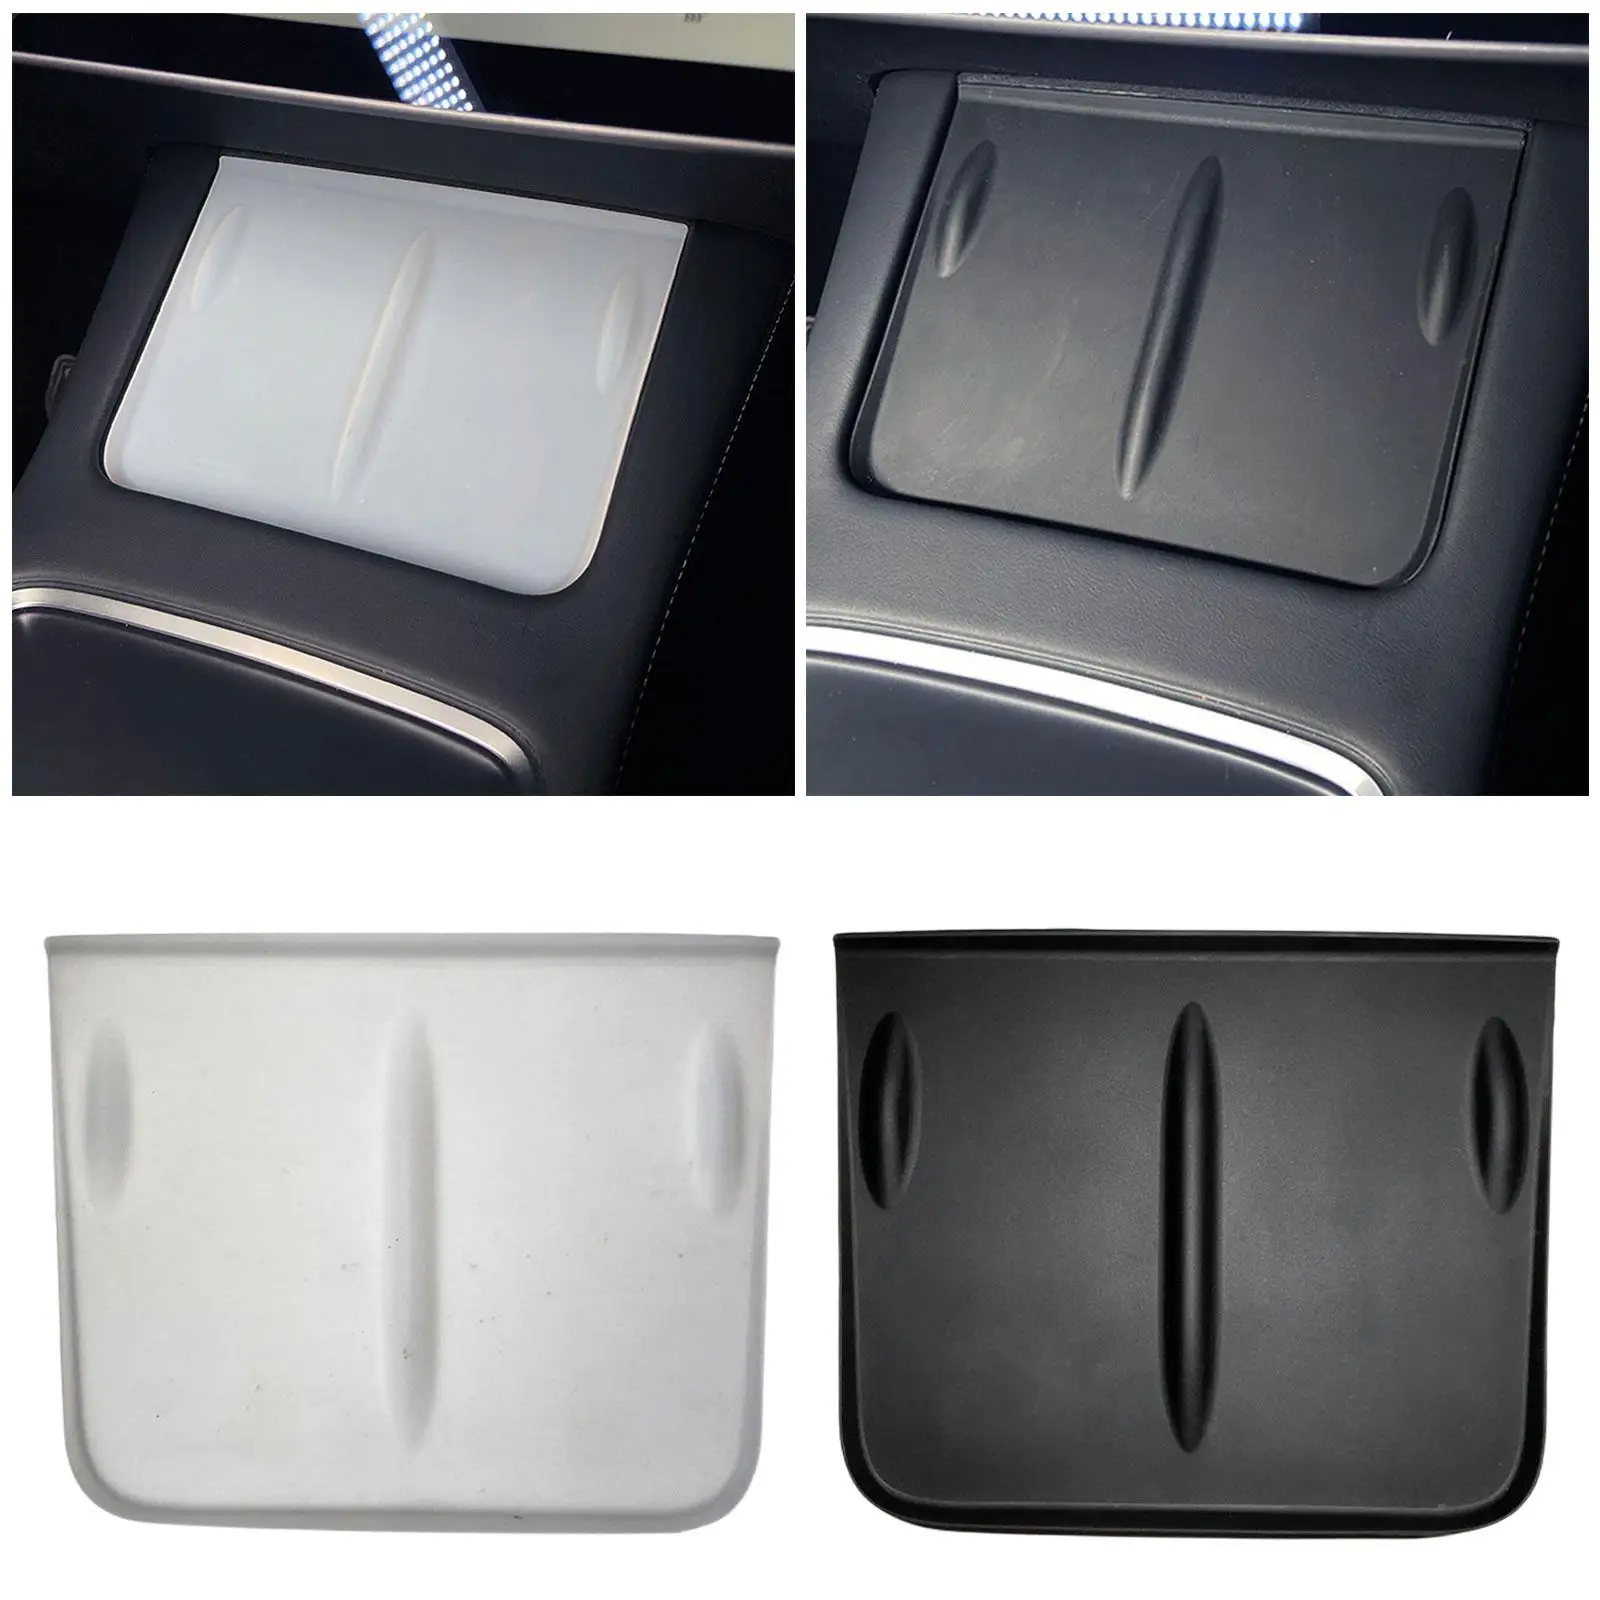  Charging Silicone Pad Car Interior Center Console Accessories Fit for 